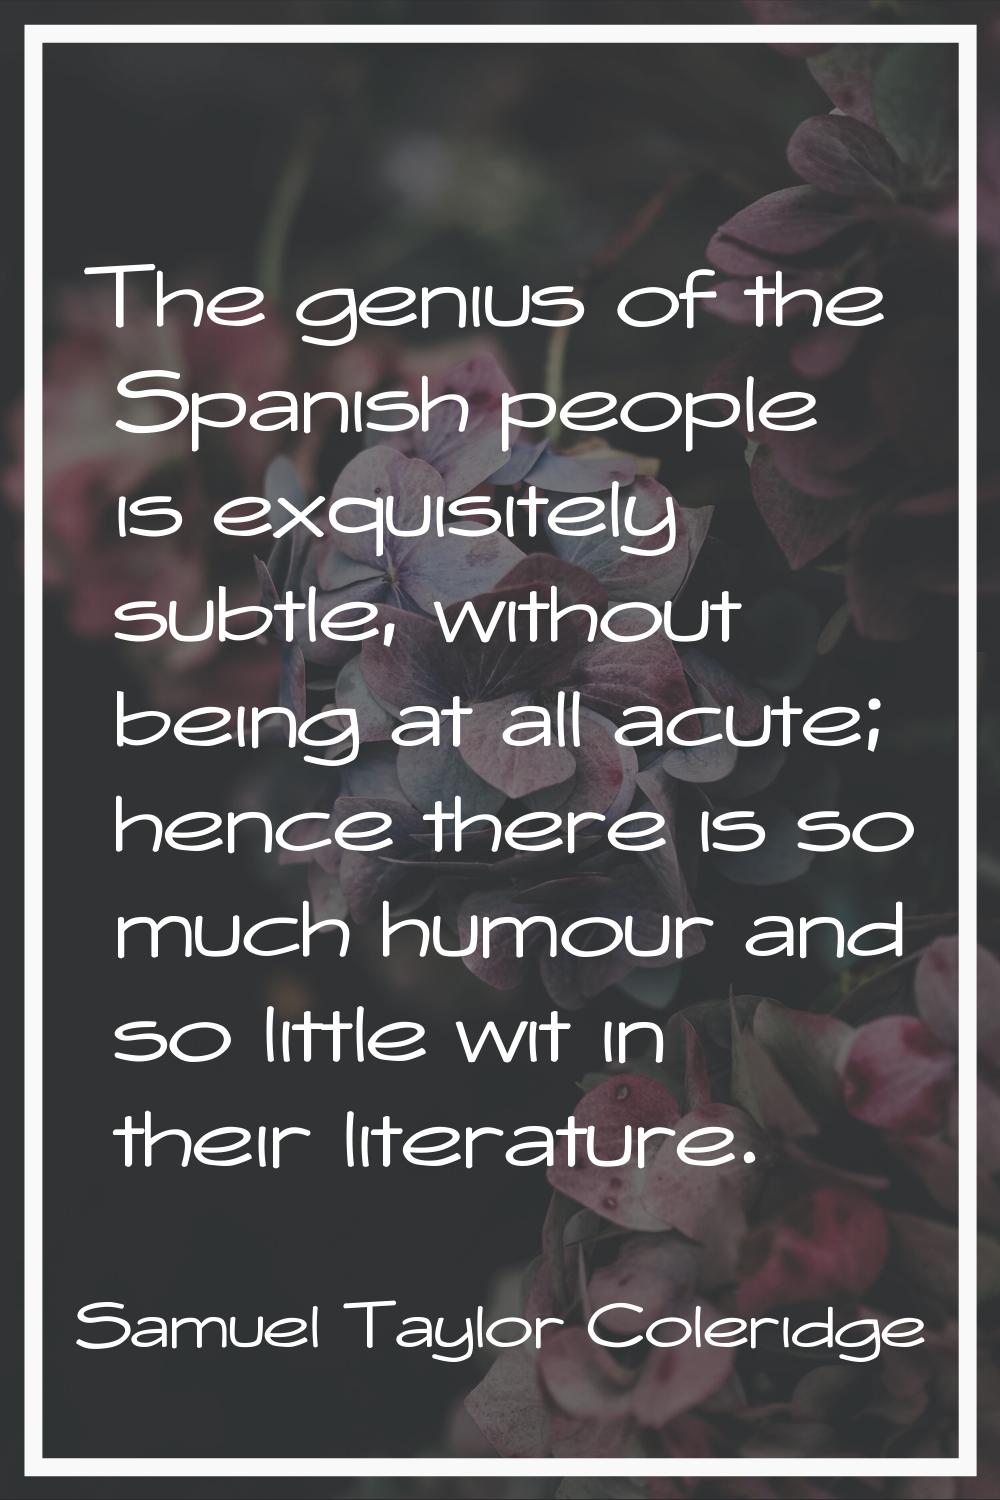 The genius of the Spanish people is exquisitely subtle, without being at all acute; hence there is 